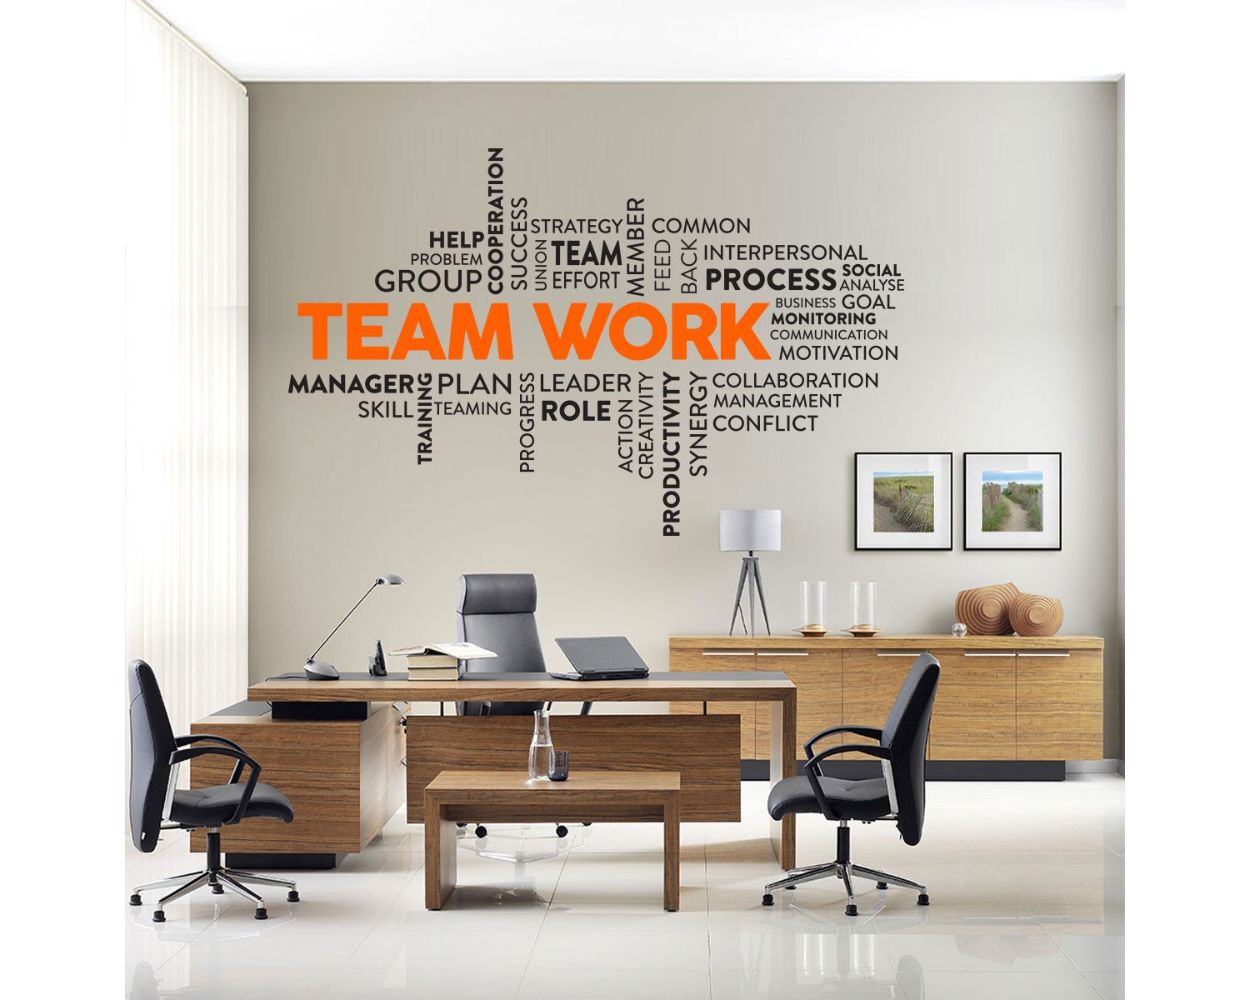 Teamwork Inspirational Quote Wall Stickers for office motivational wall decor